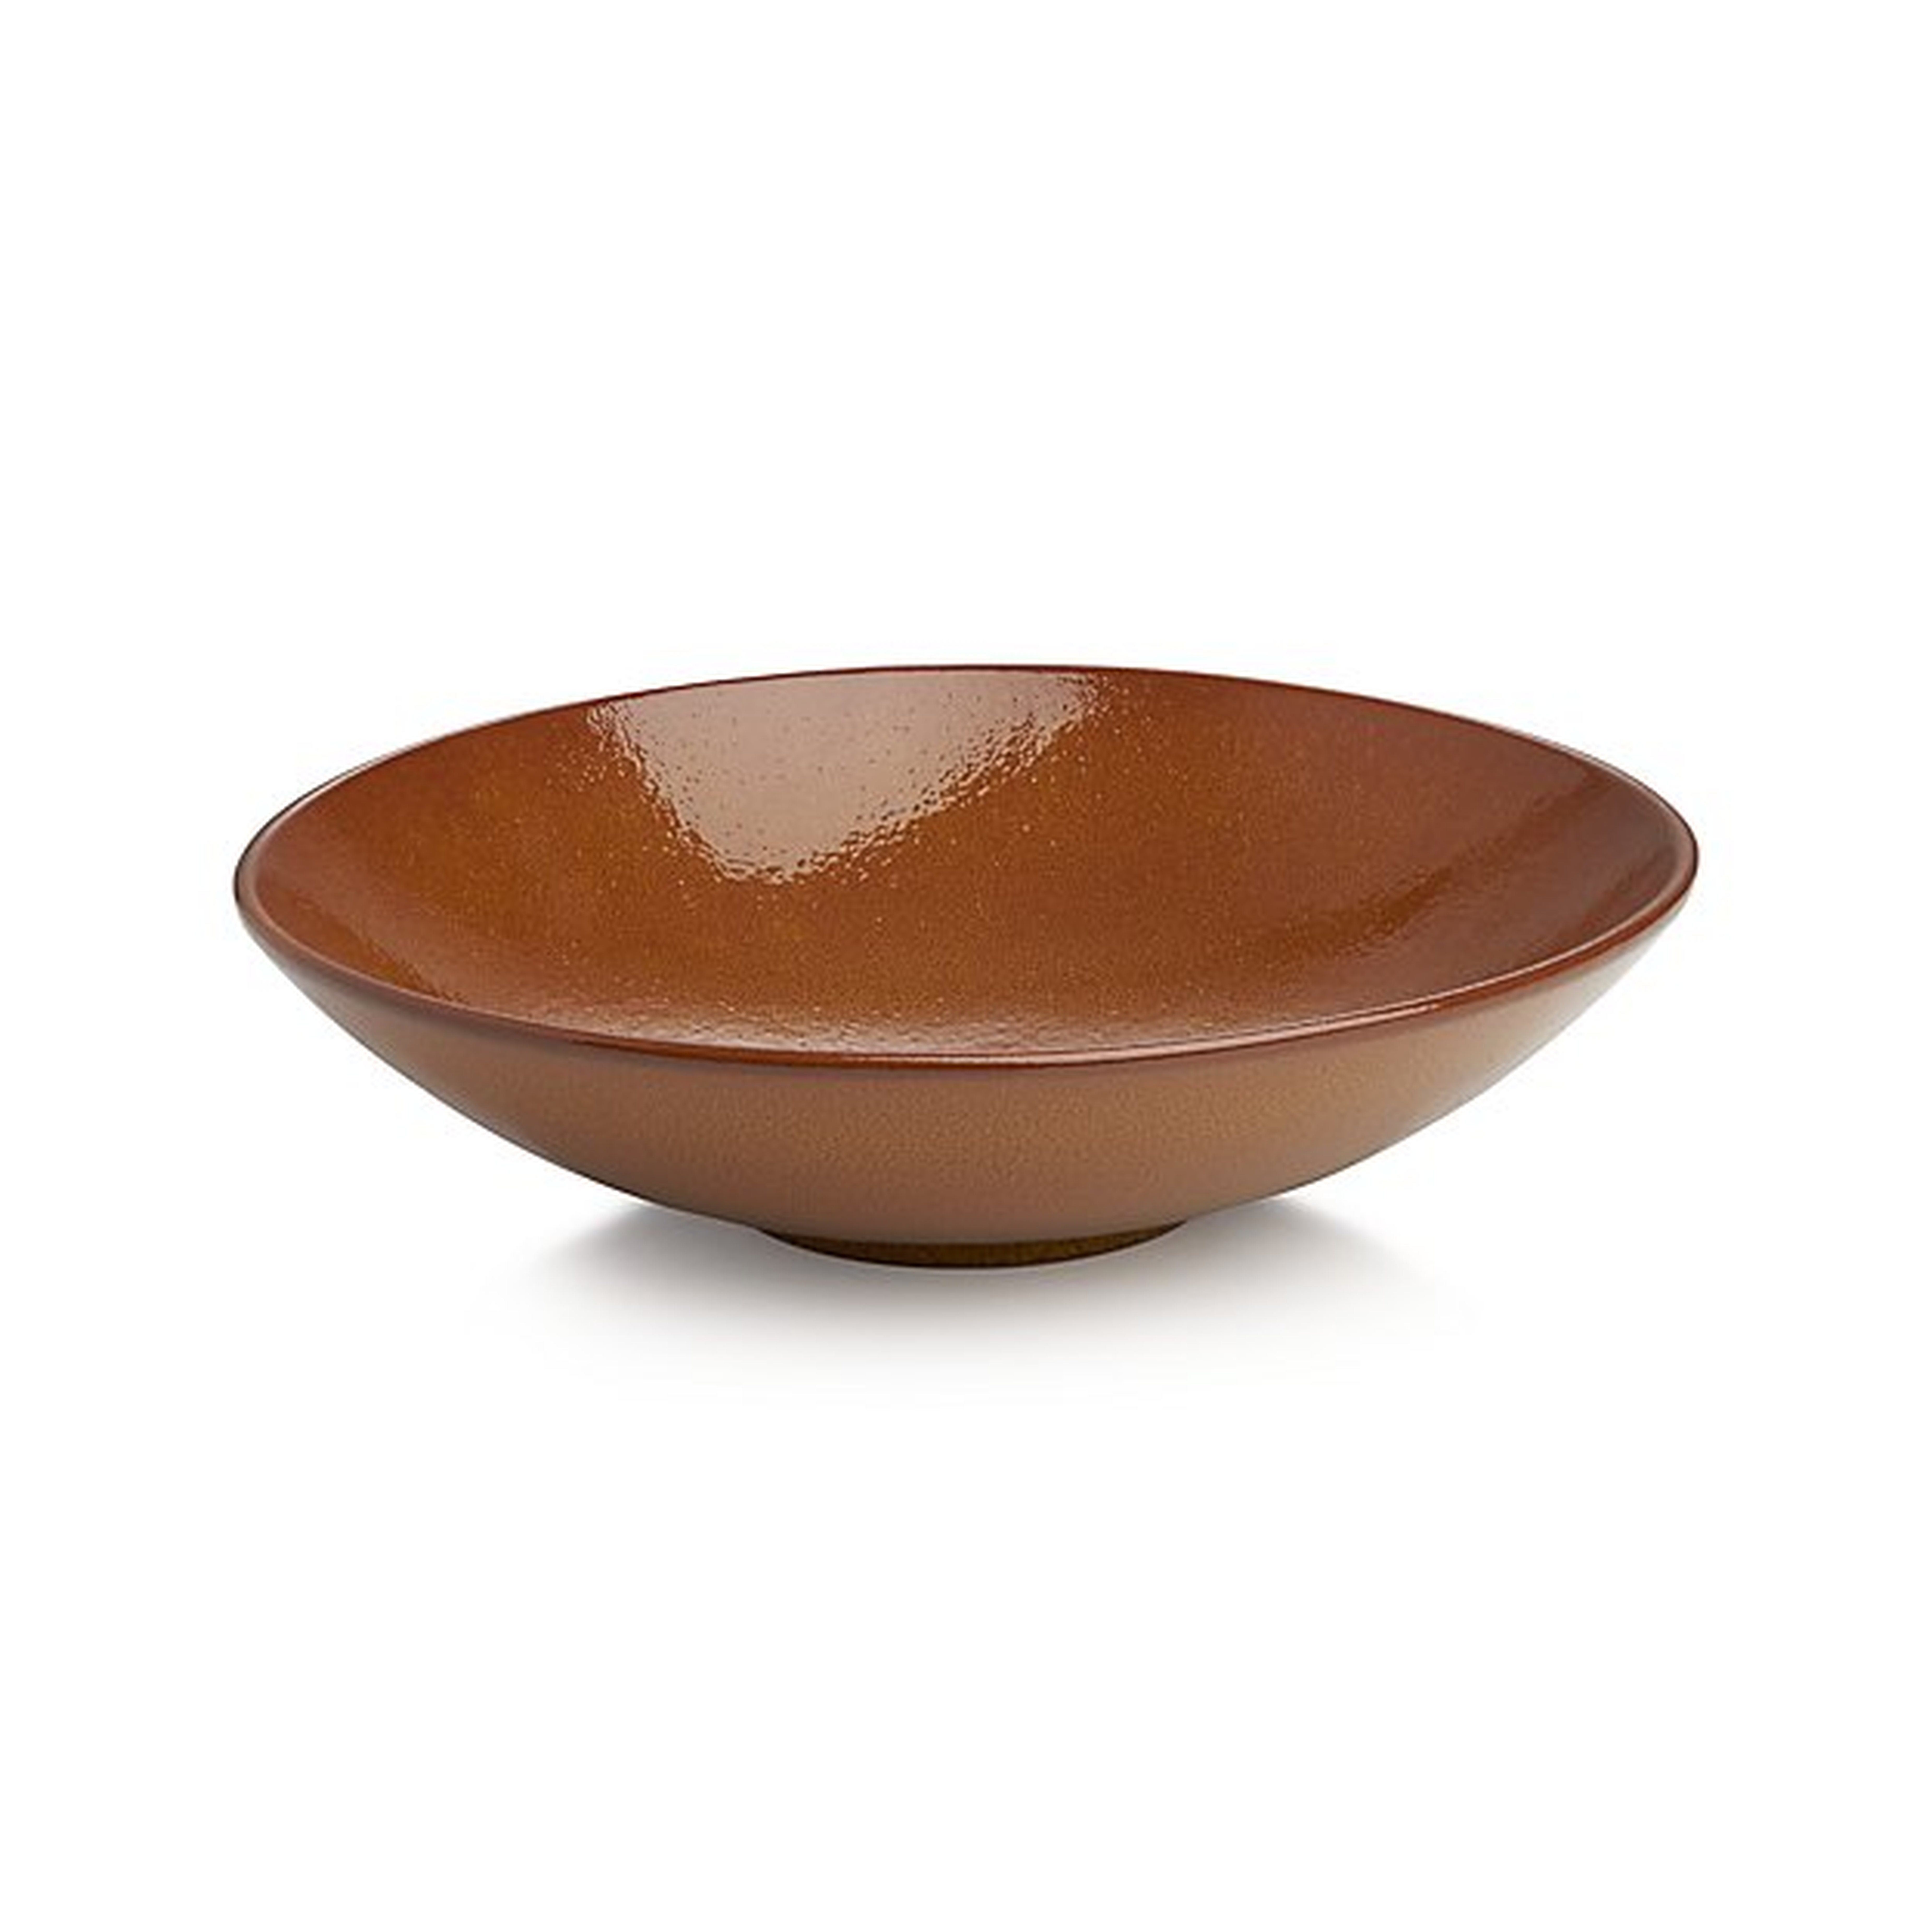 Ansley Centerpiece Bowl - Crate and Barrel